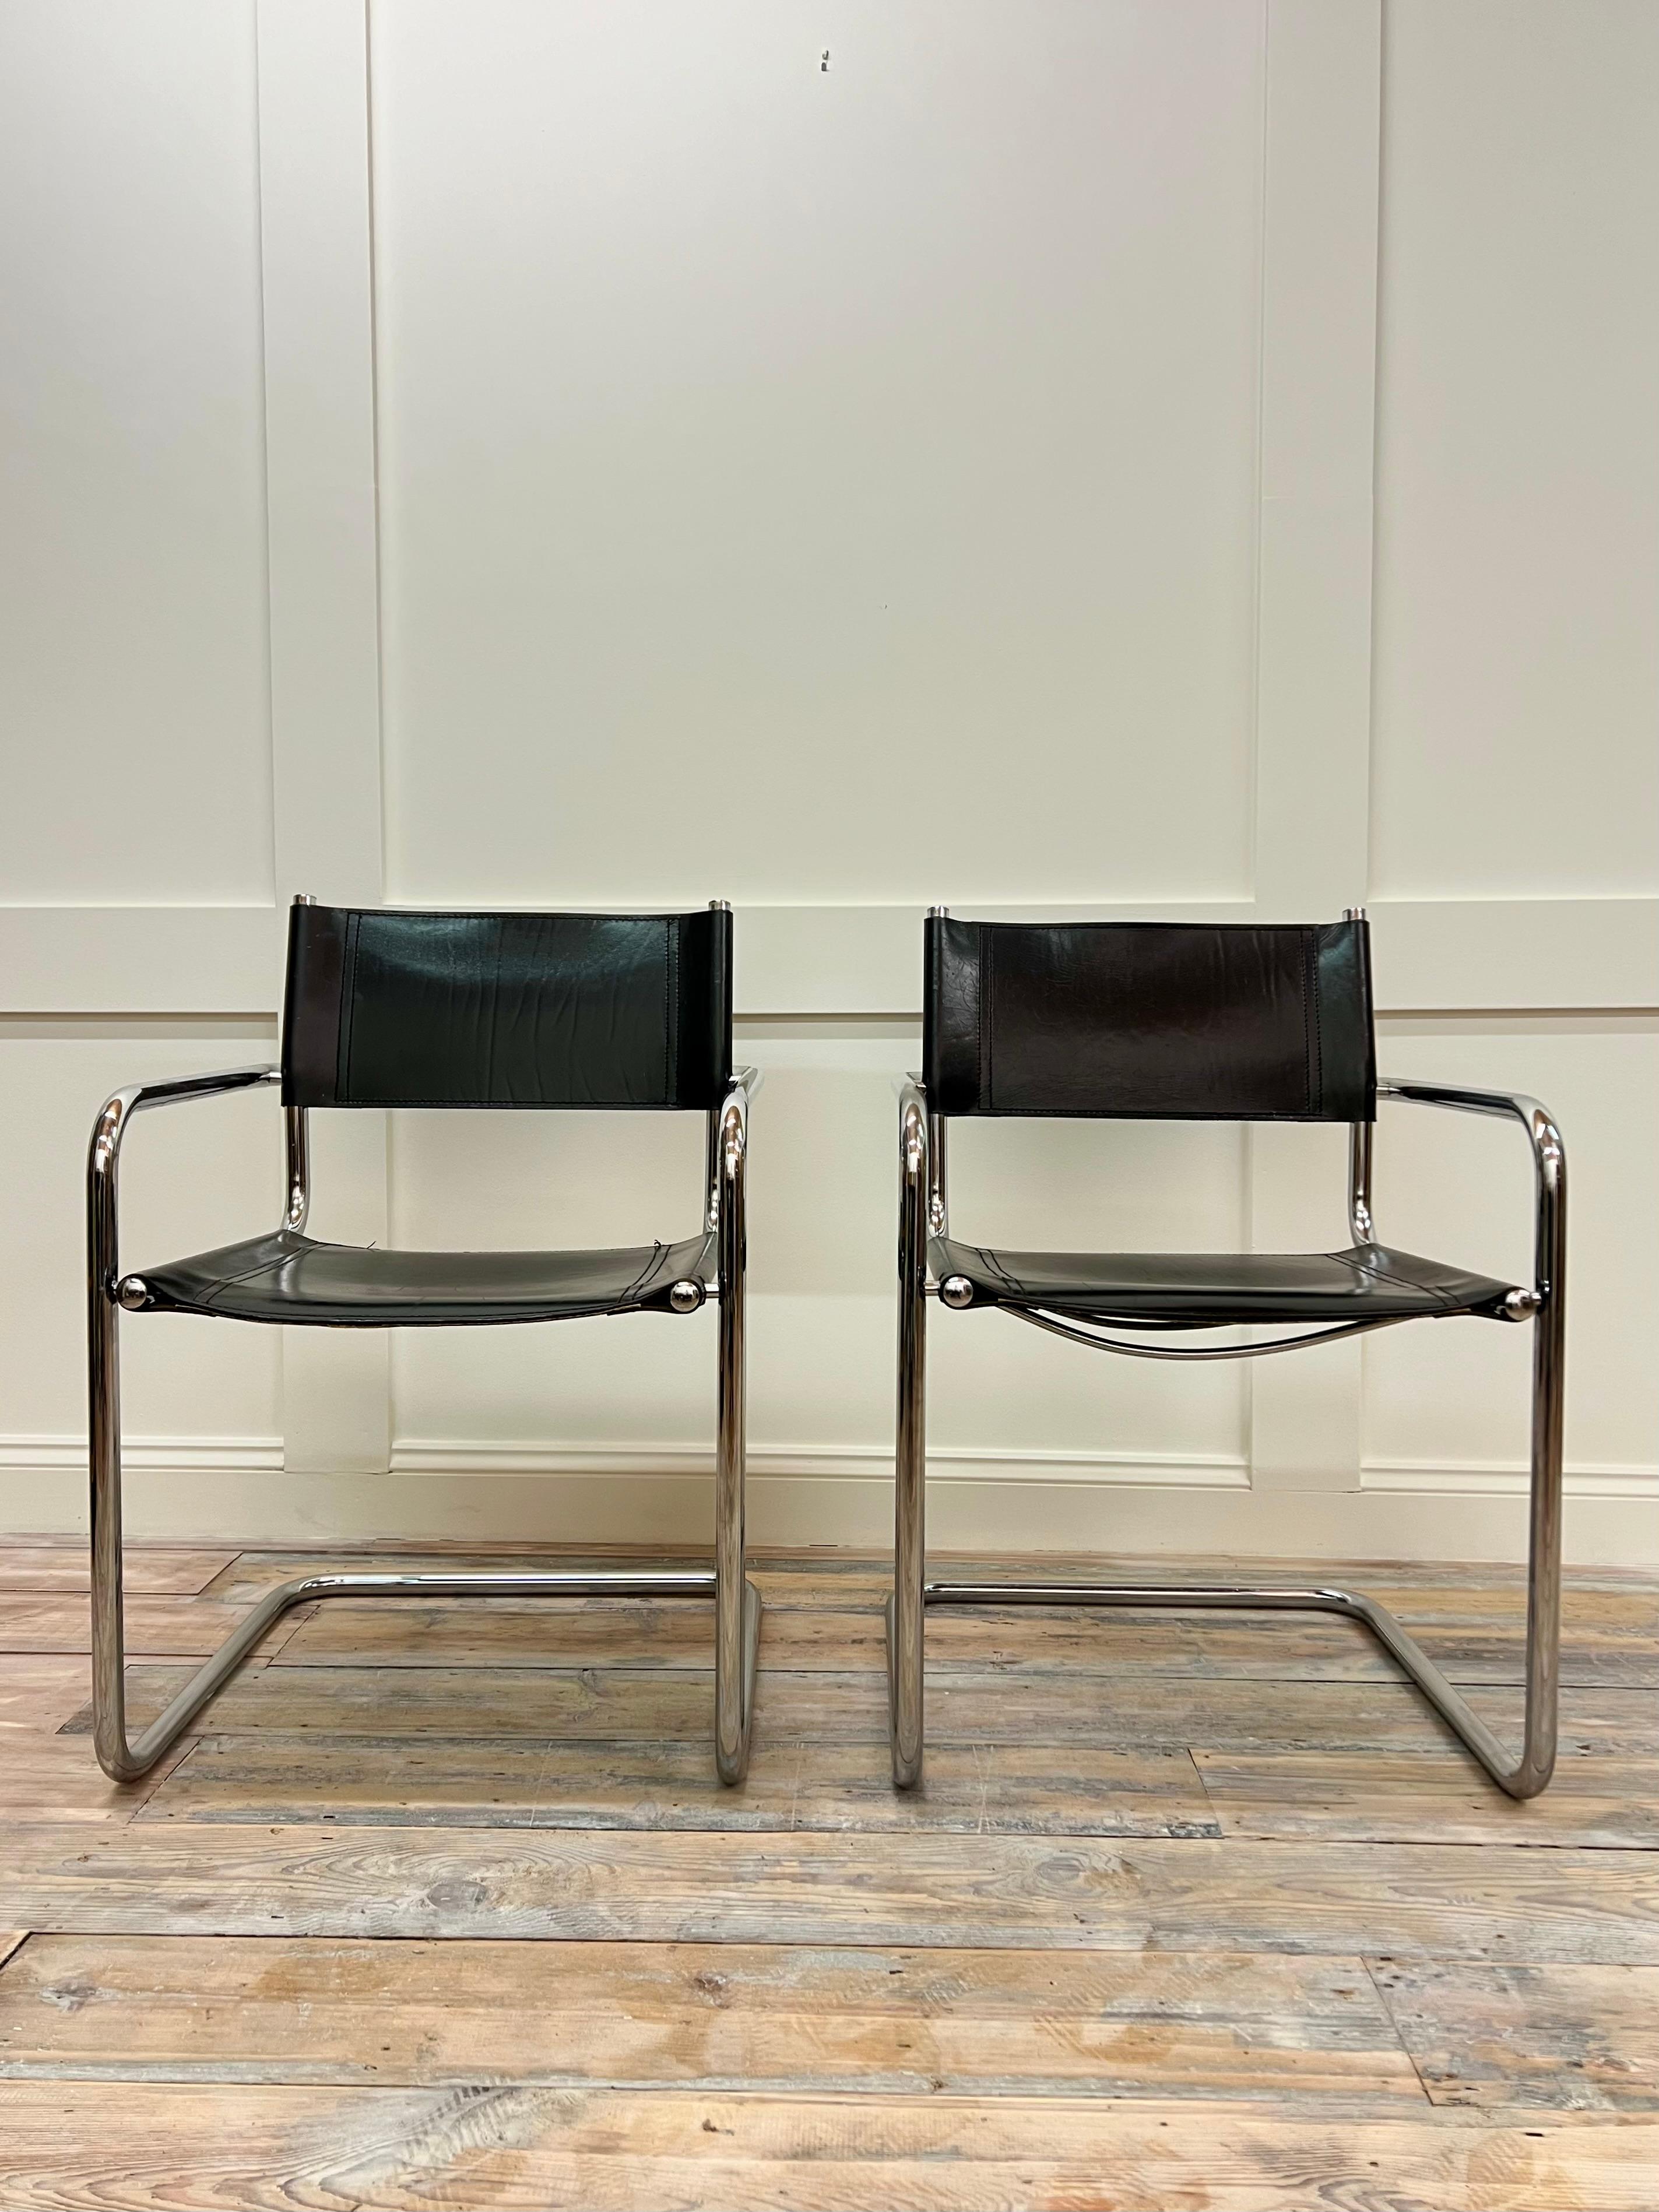 Set of 2 chrome metal armchairs model B34 by Marcel Breuer, reissued under license by the Italian company Matteo Grassi in the 1960s.  Chromed  tubular steel structure, the back and seat are upholstered in thick black leather, stitched with saddle